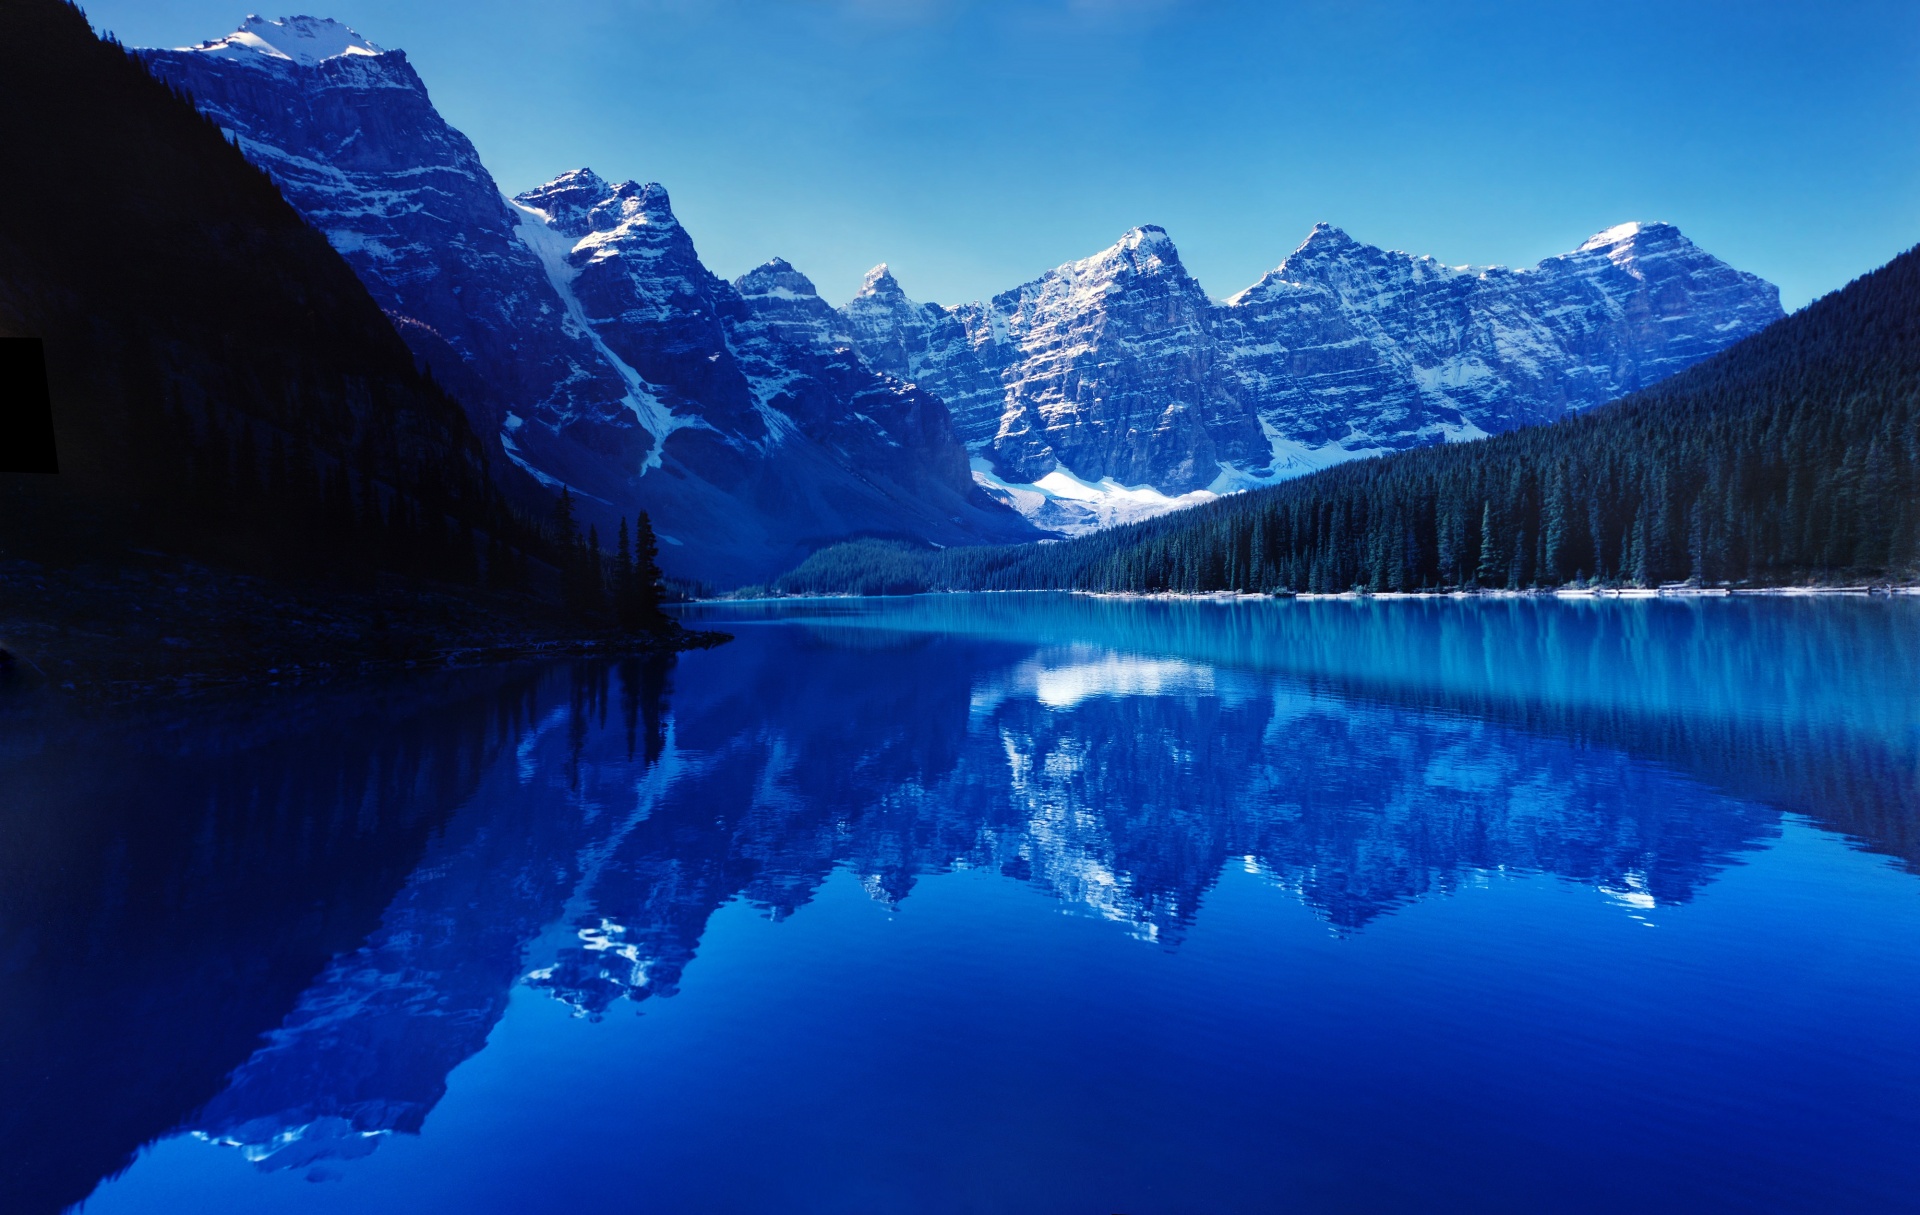 Scenic Moraine Lake in the Canadian Rockies